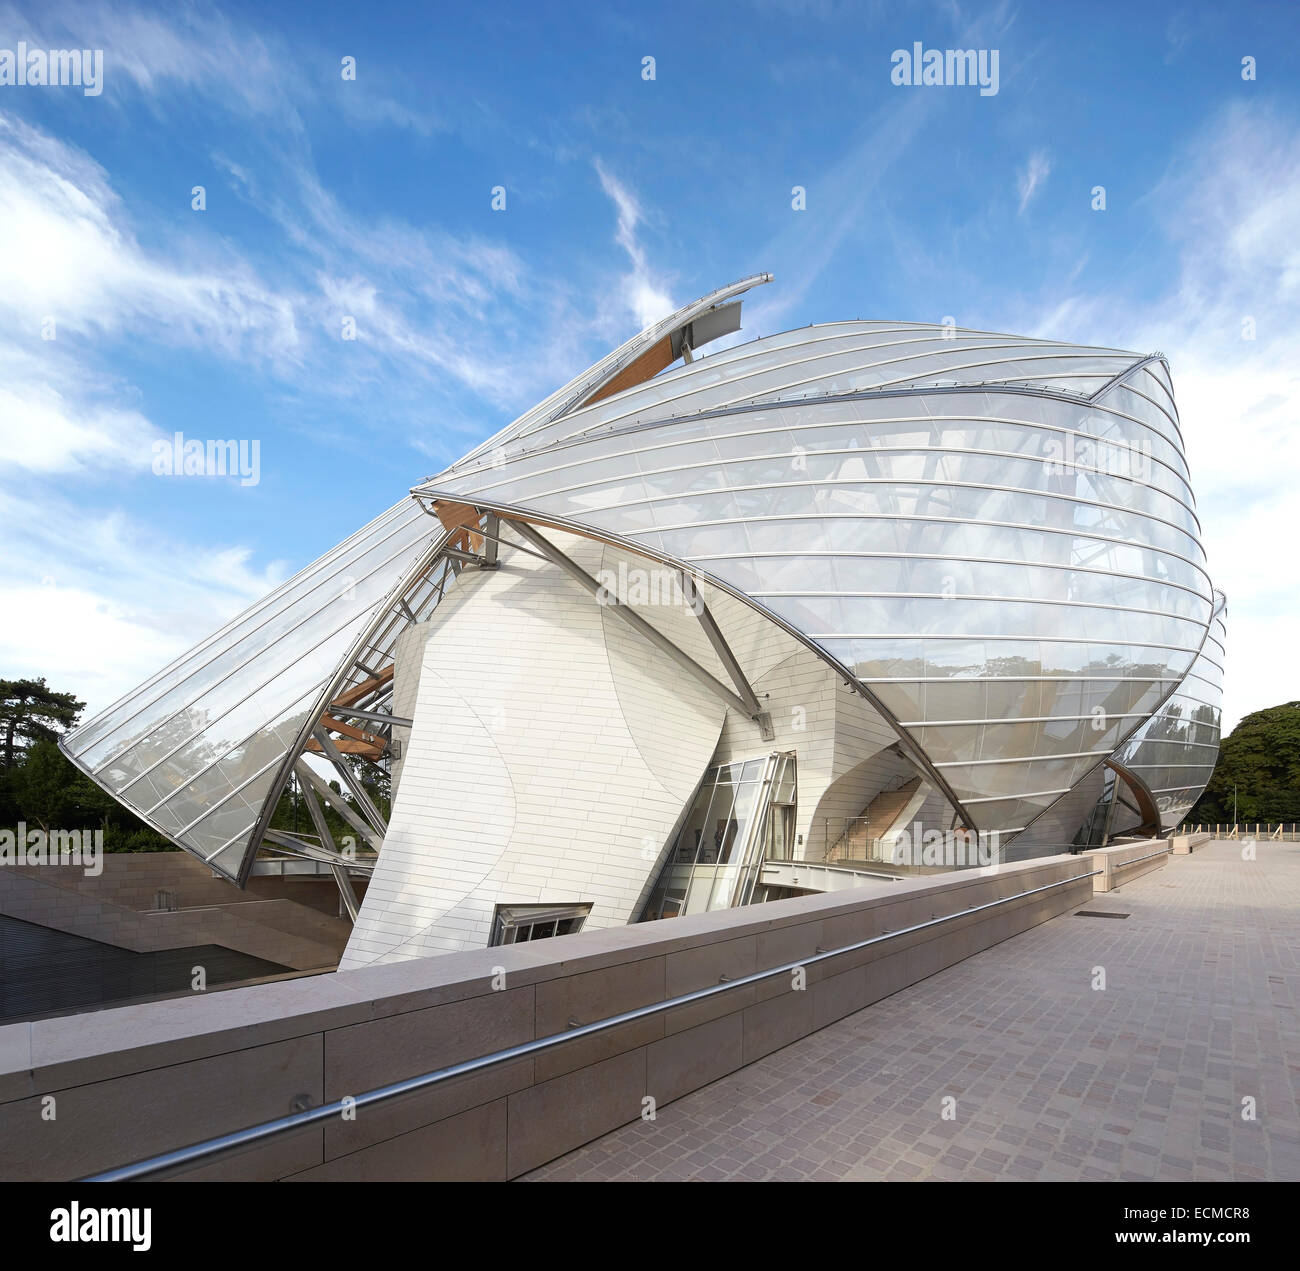 The modern architecture of Louis Vuitton Foundation by Frank Gehry